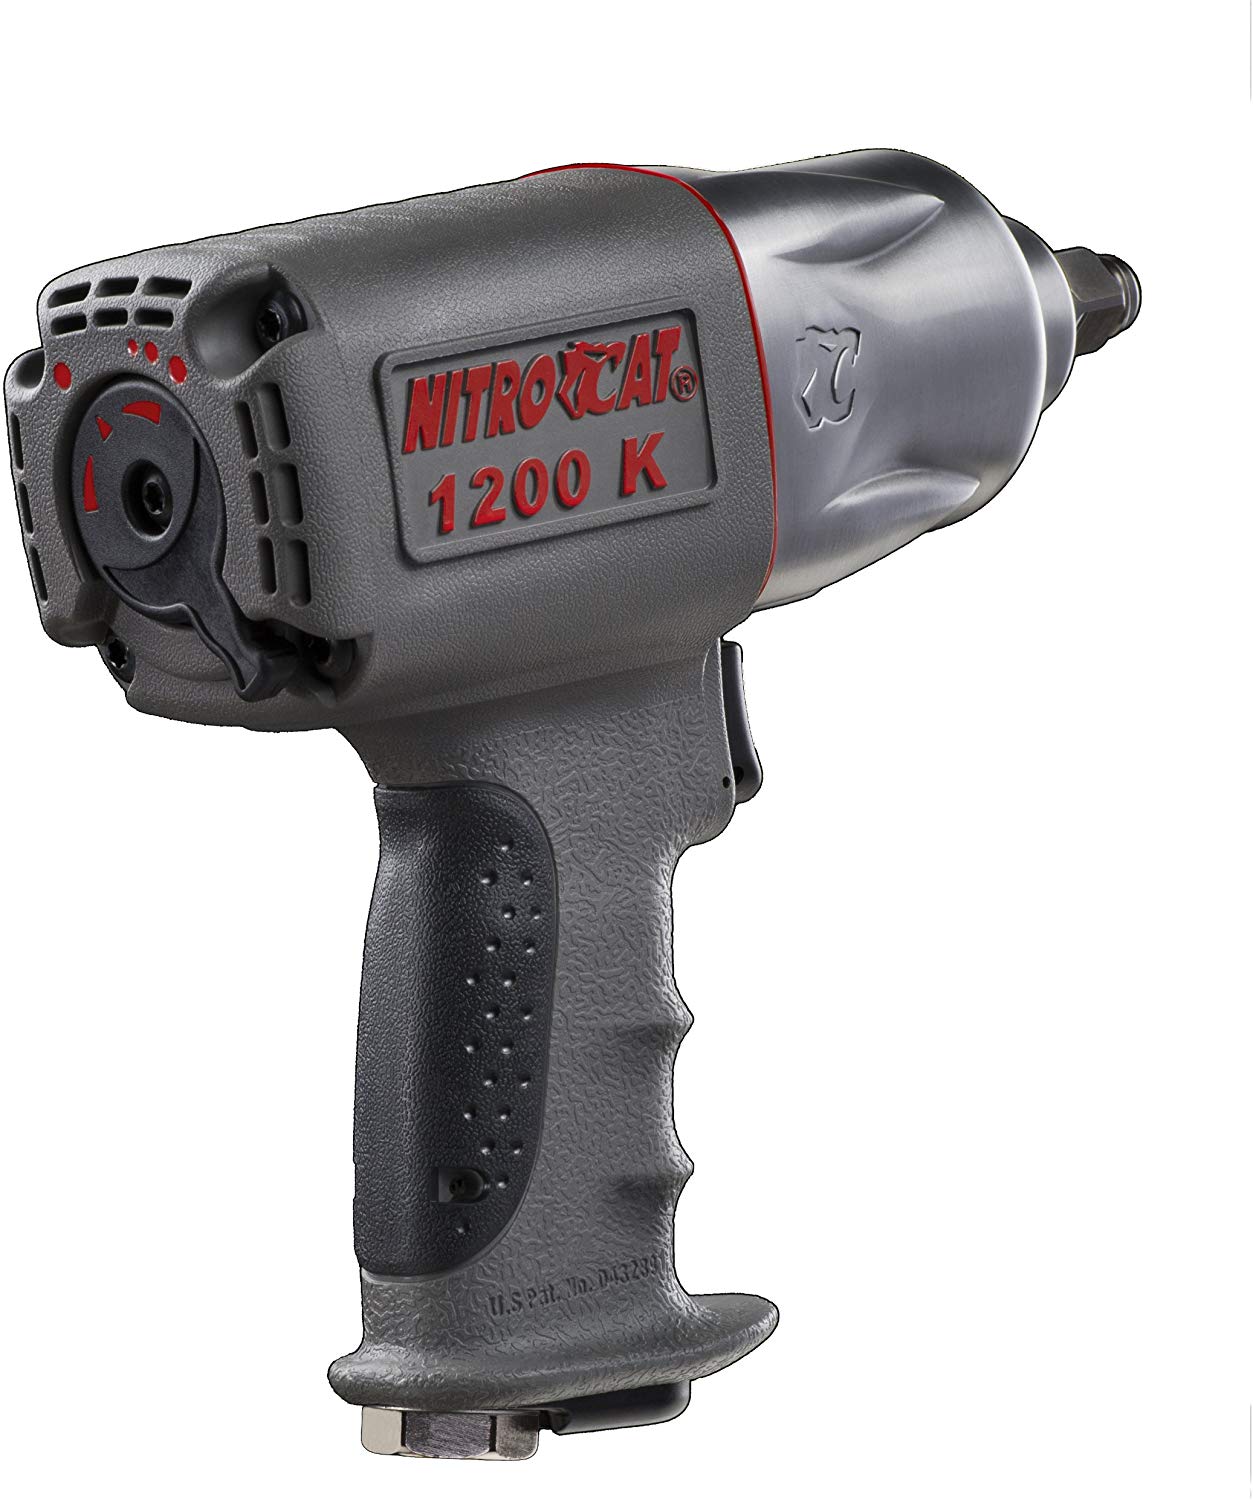 NITROCAT 1200-K 1/2-Inch Kevlar Composite Air Impact Wrench with Twin Clutch Mechanism - MPR Tools & Equipment